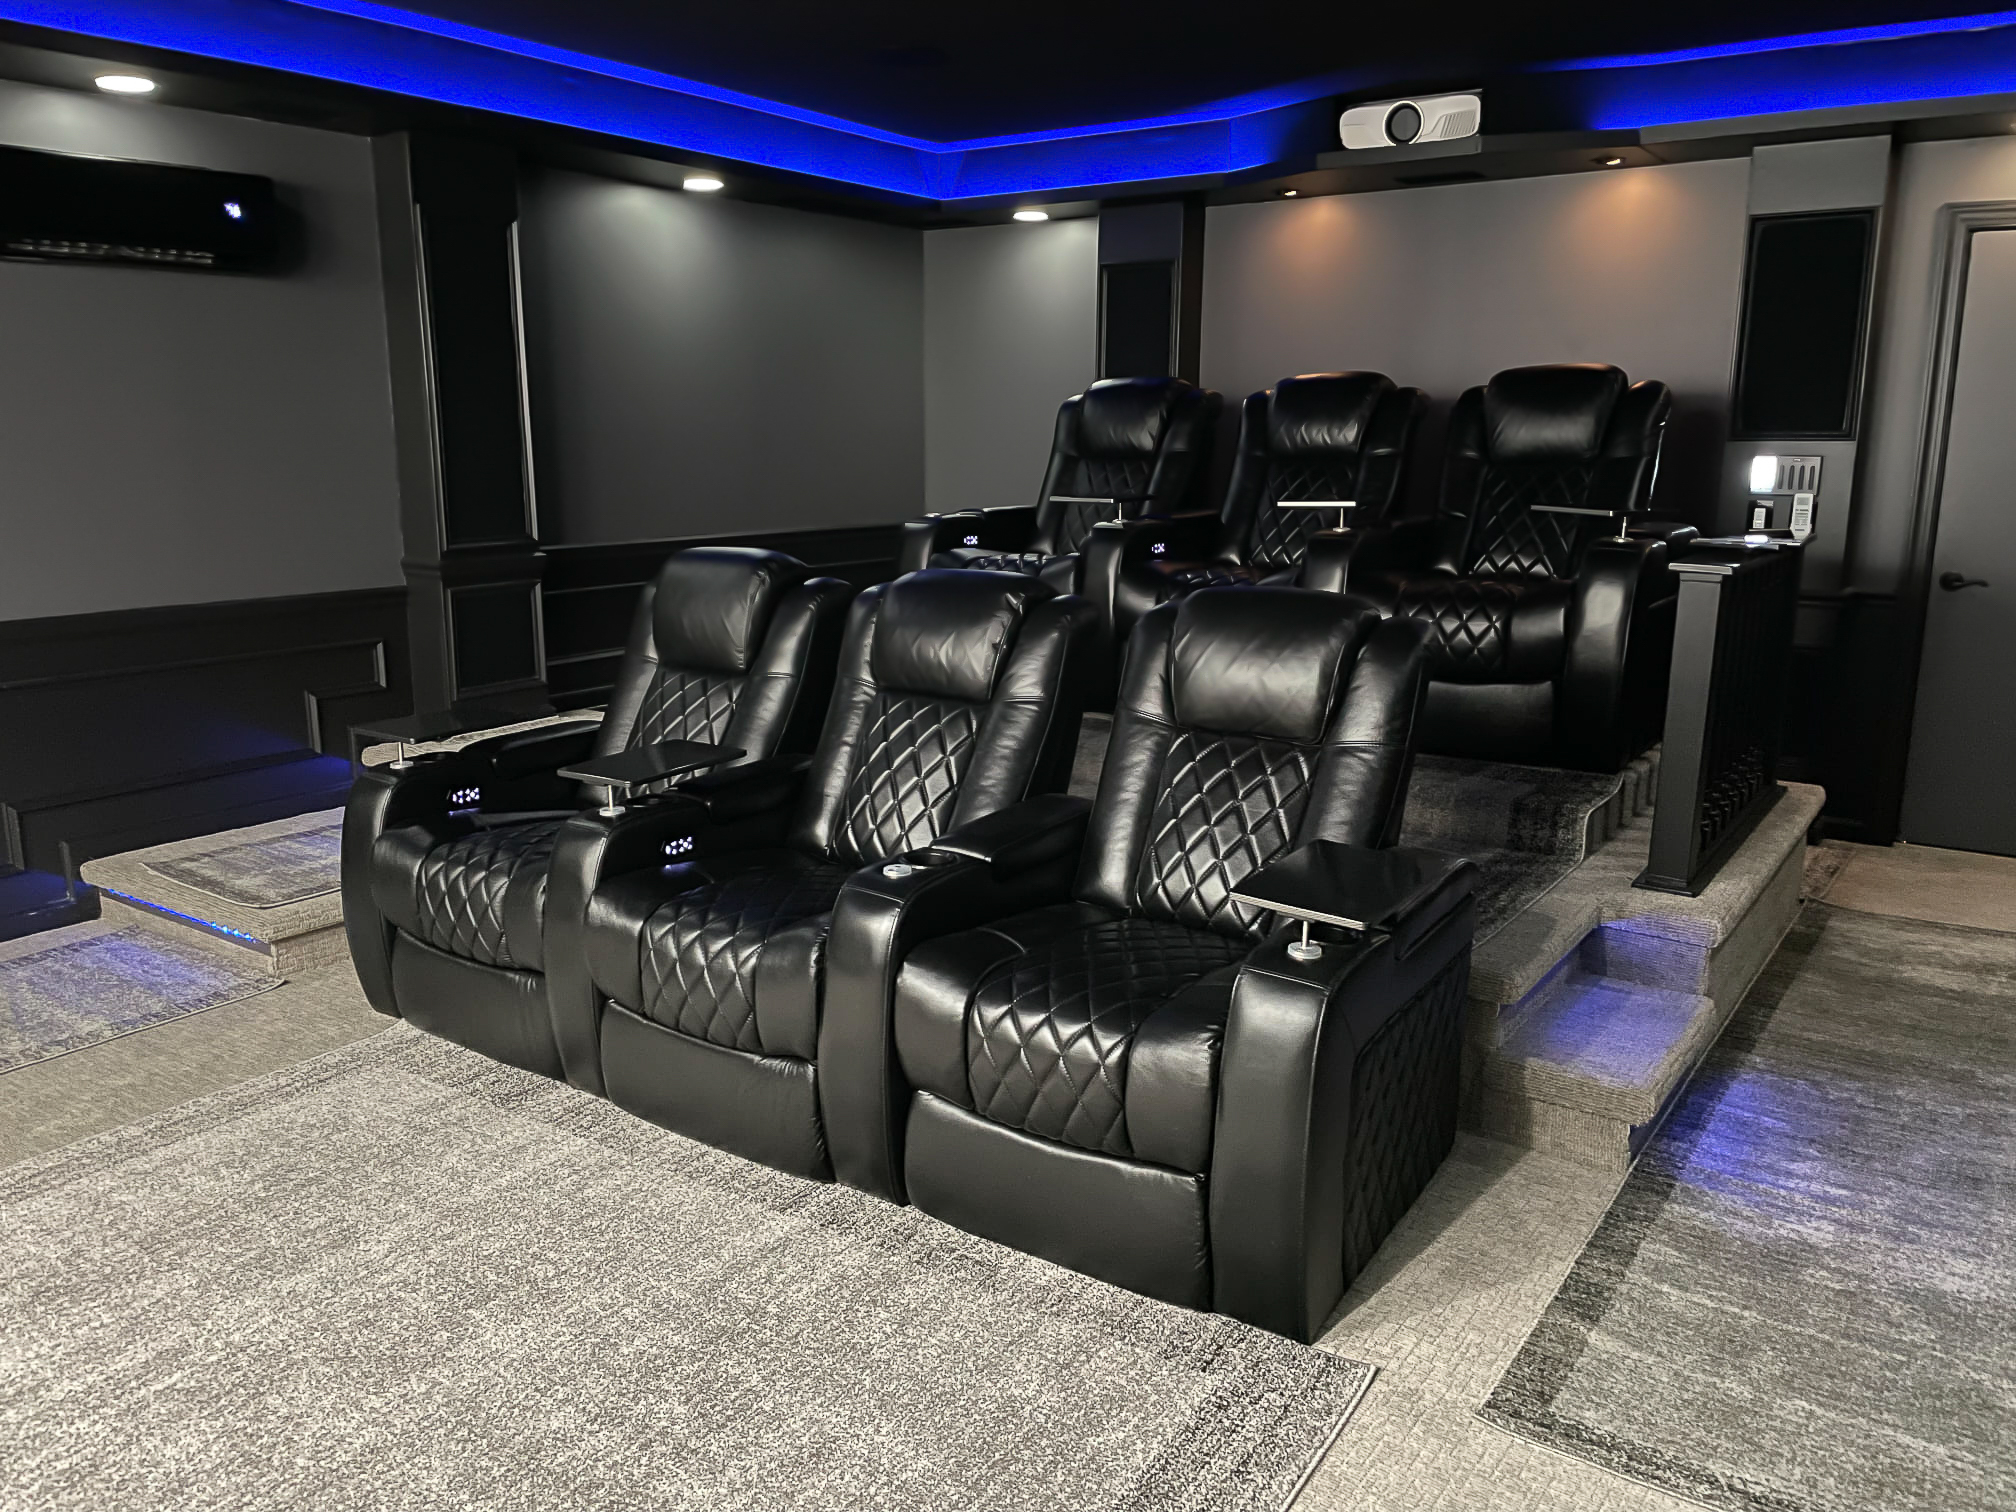 Advantages of a Dedicated Home Theater